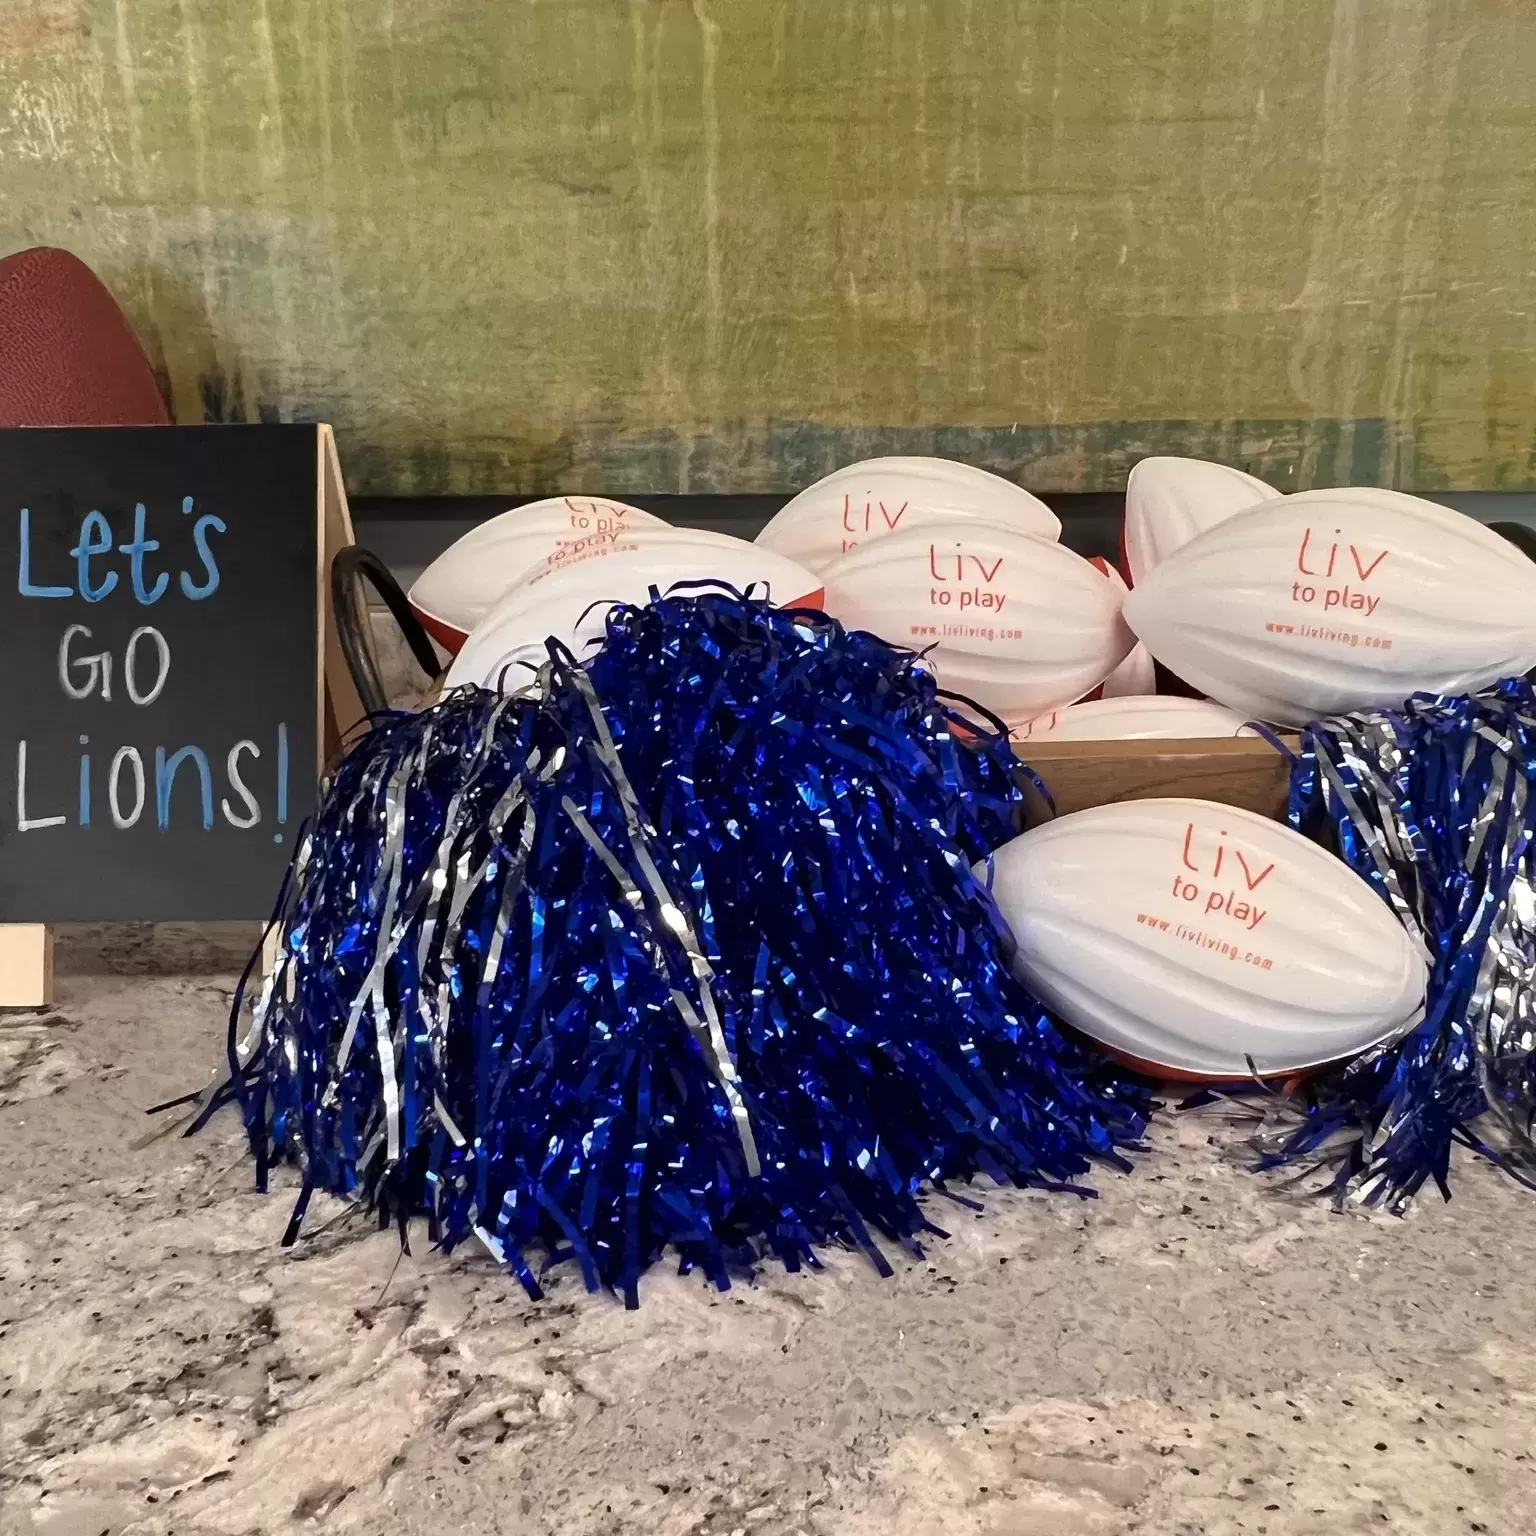 🏈🦁🔵 Let's get ready for an epic showdown tonight as the Lions take on the Chiefs! We'll be proudly cheering on the Honolulu Blue and Silver. The energy is going to be electric as Dan Campbell leads the Lions tonight against the reigning Super Bowl champs, Kansas City Chiefs. To celebrate, come grab a Liv to Play football. 

Who's your pick for tonight's game? 

#LionsVsChiefs #GameDayExcitement #TeamSpirit #FootballFever #LivArbors